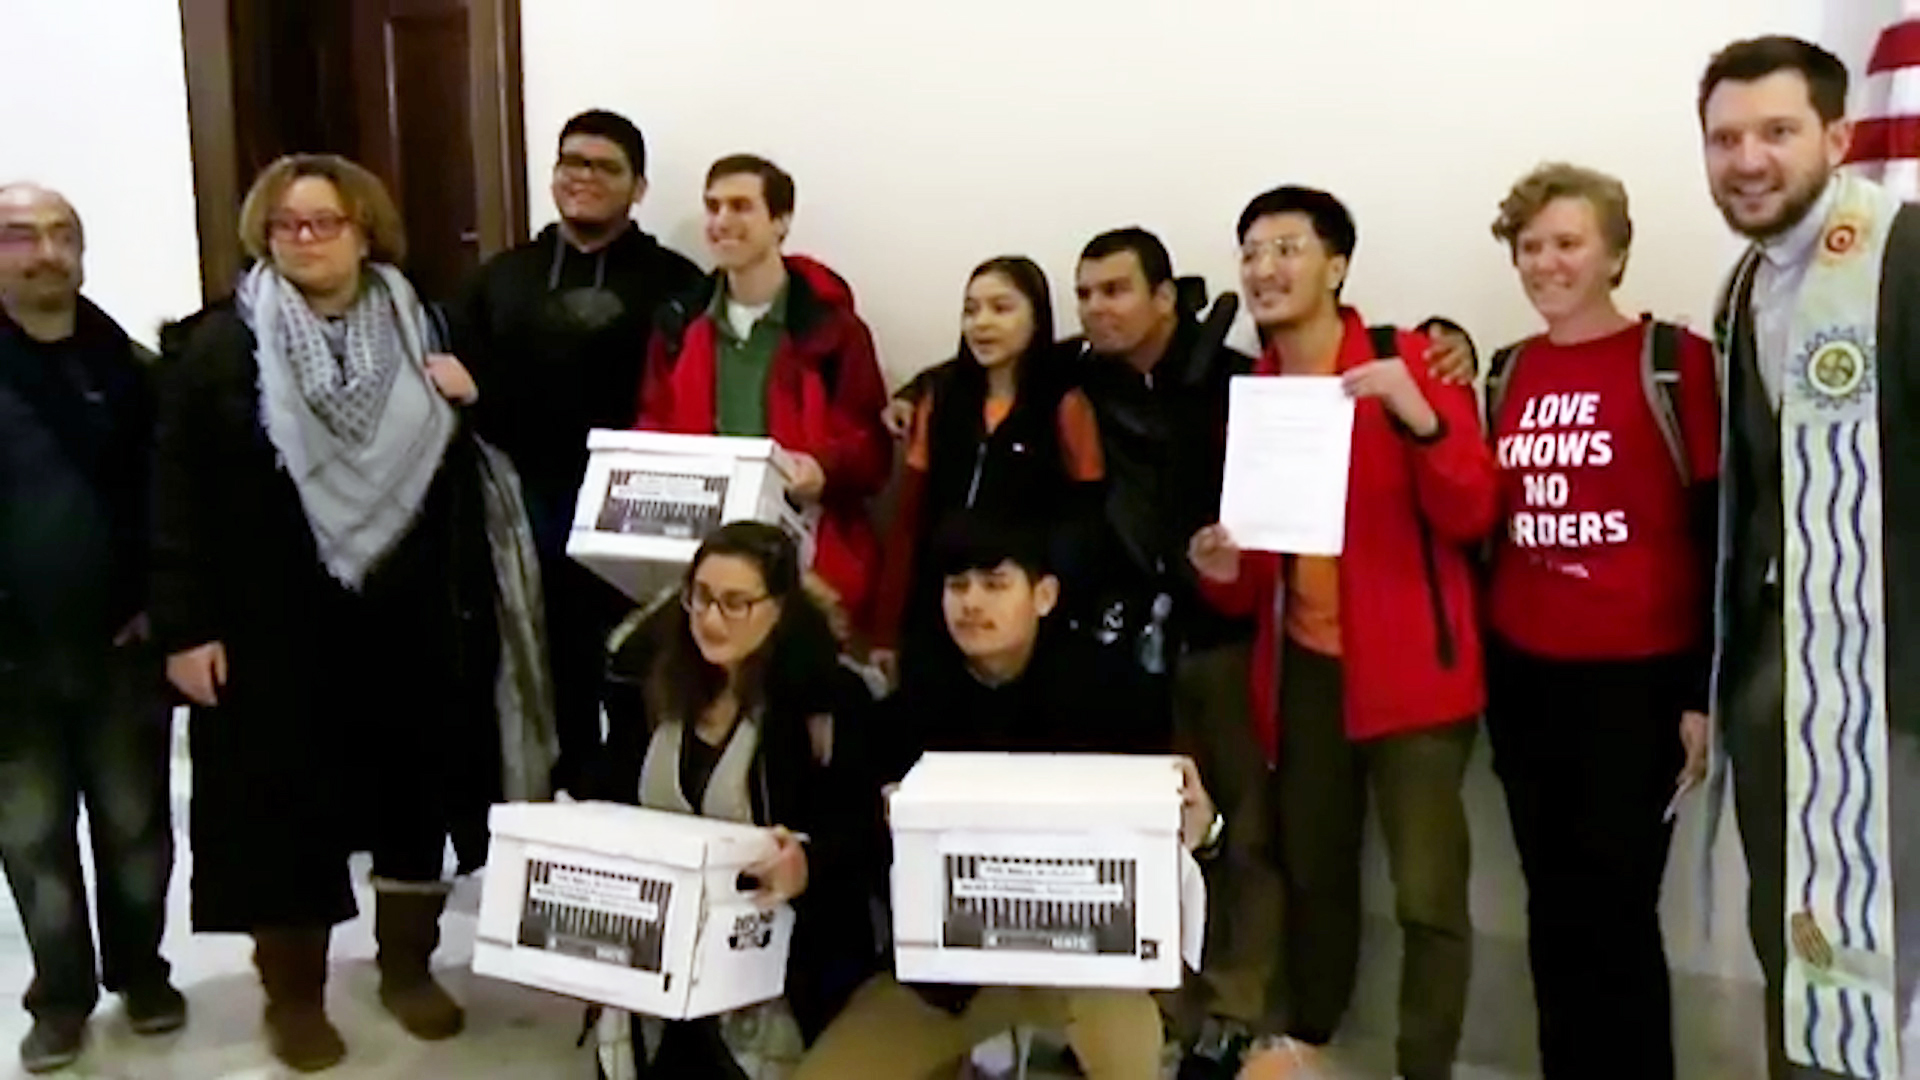 In the face of shutdown, 330K signatures delivered to Senate Leadership demanding no funding for border militarization 